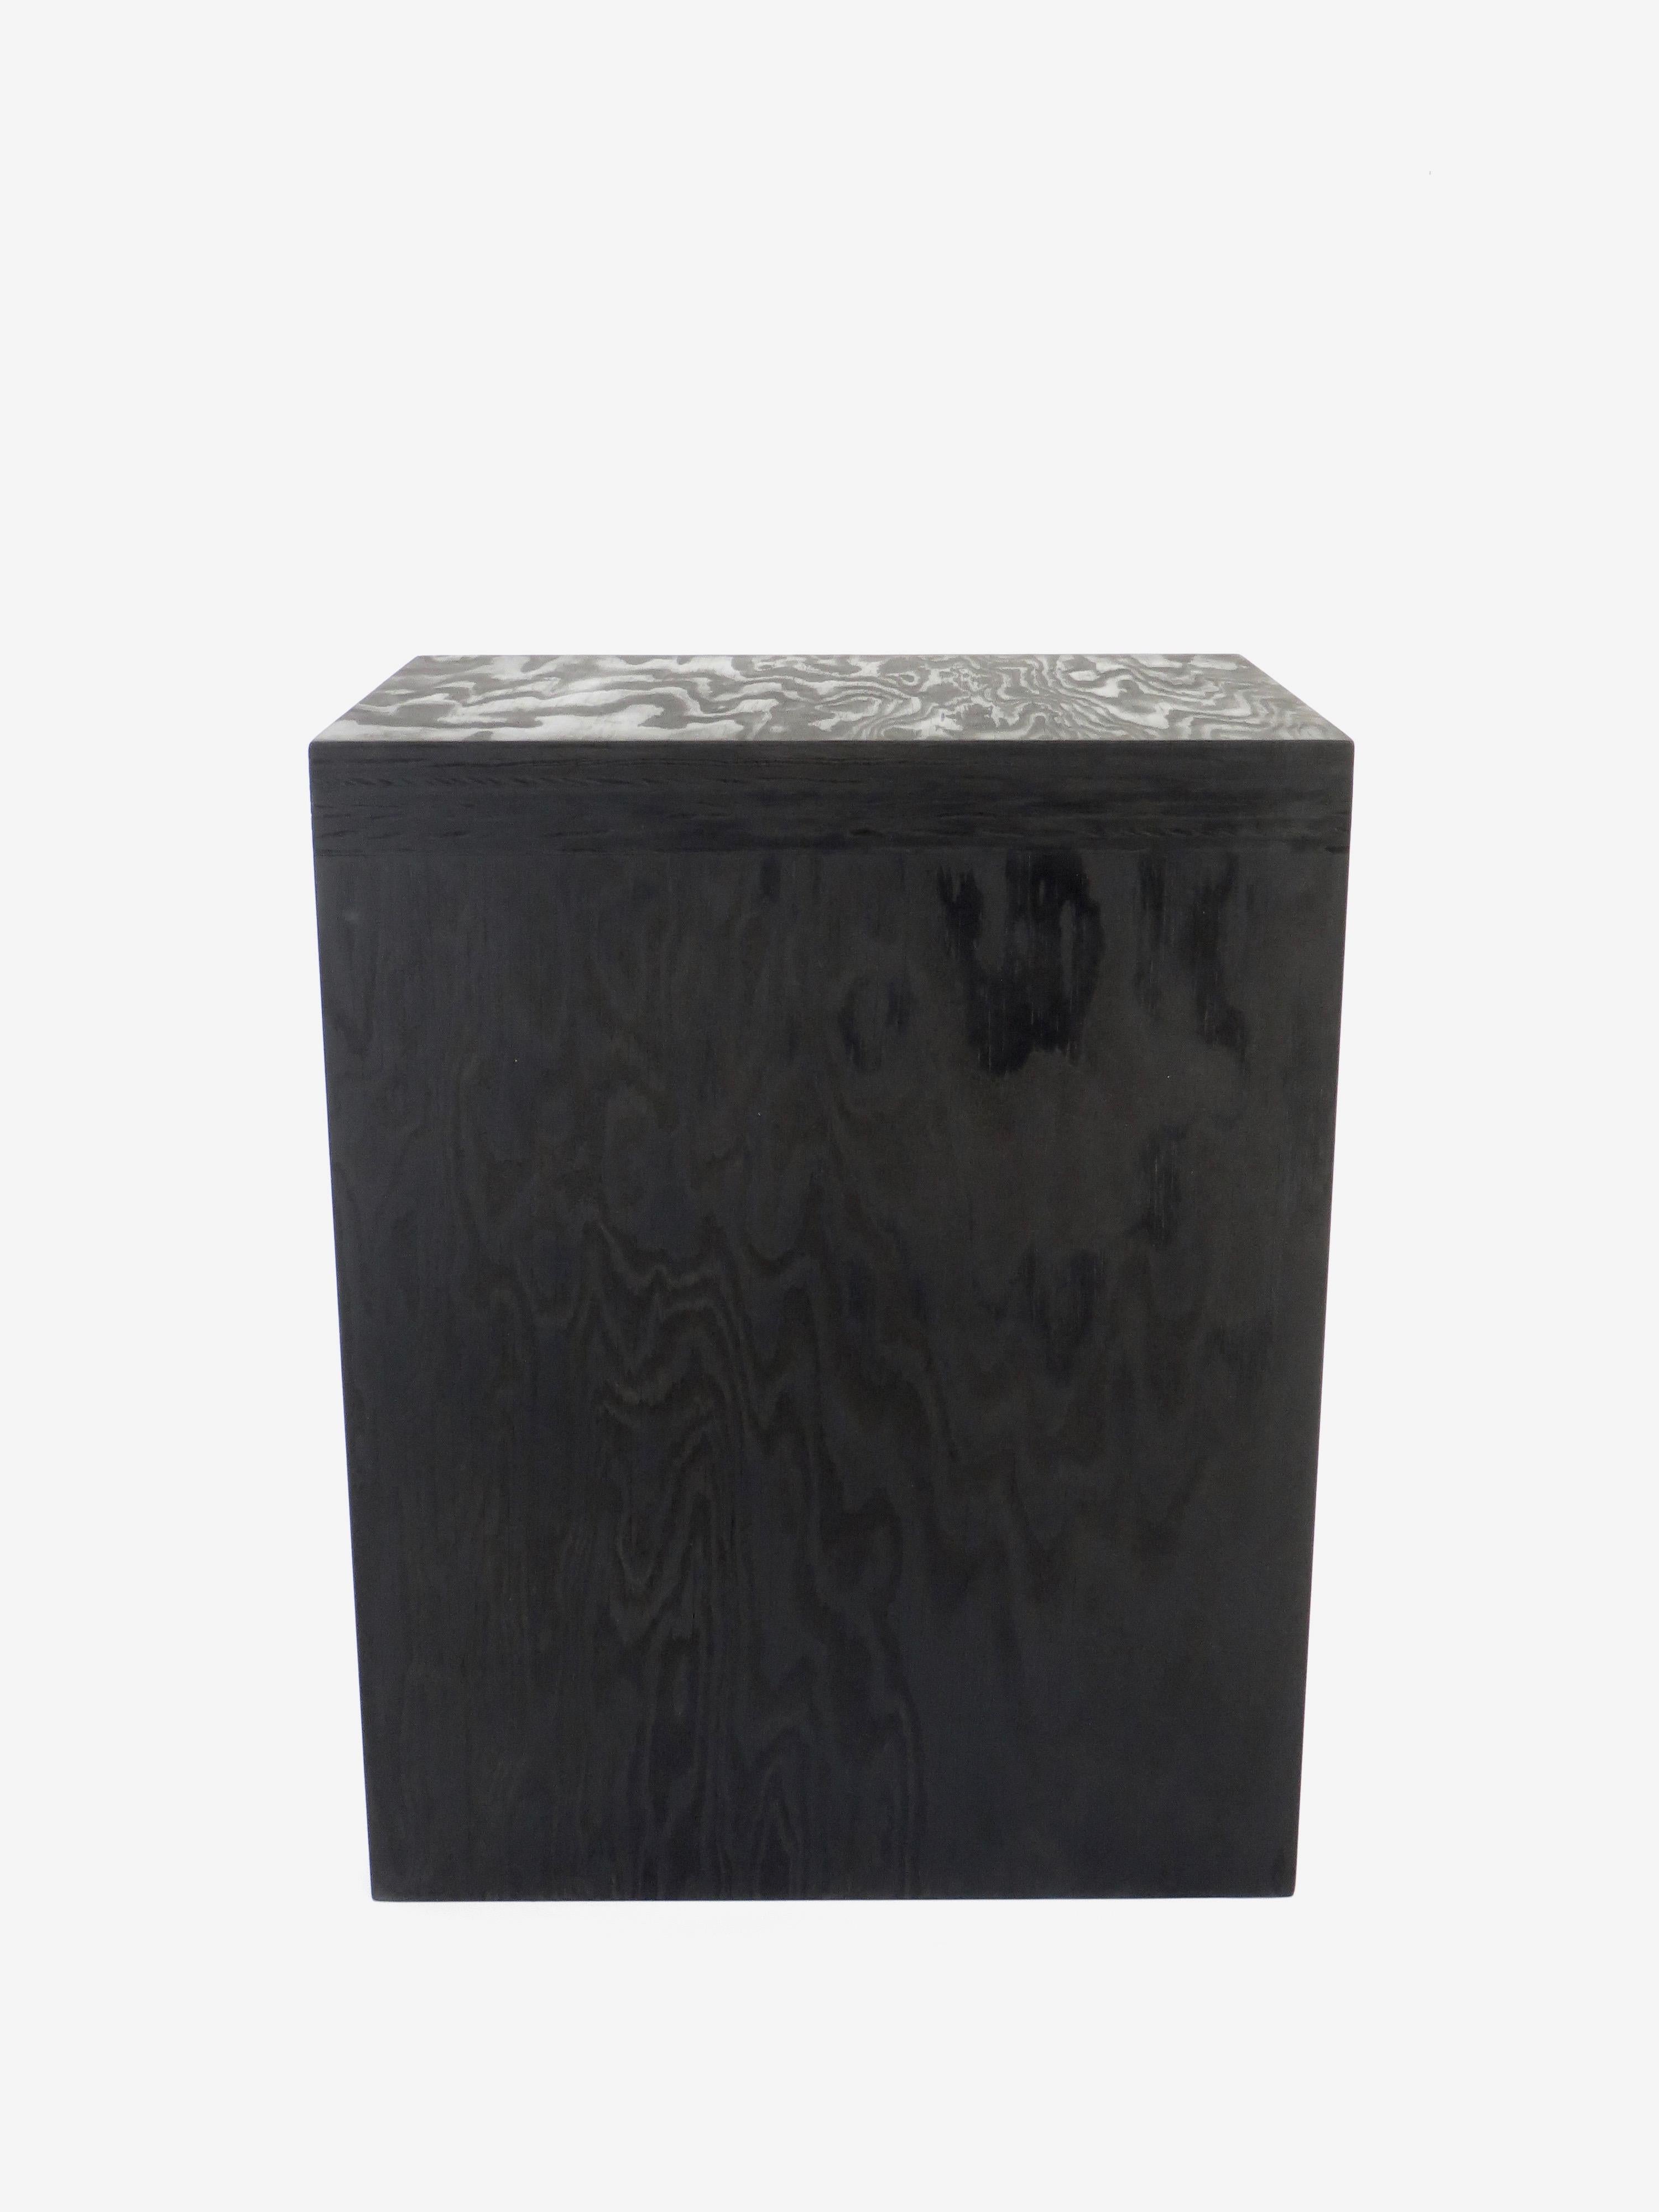 Contemporary Rick Owens Stag T Stool in Black Stained Wood